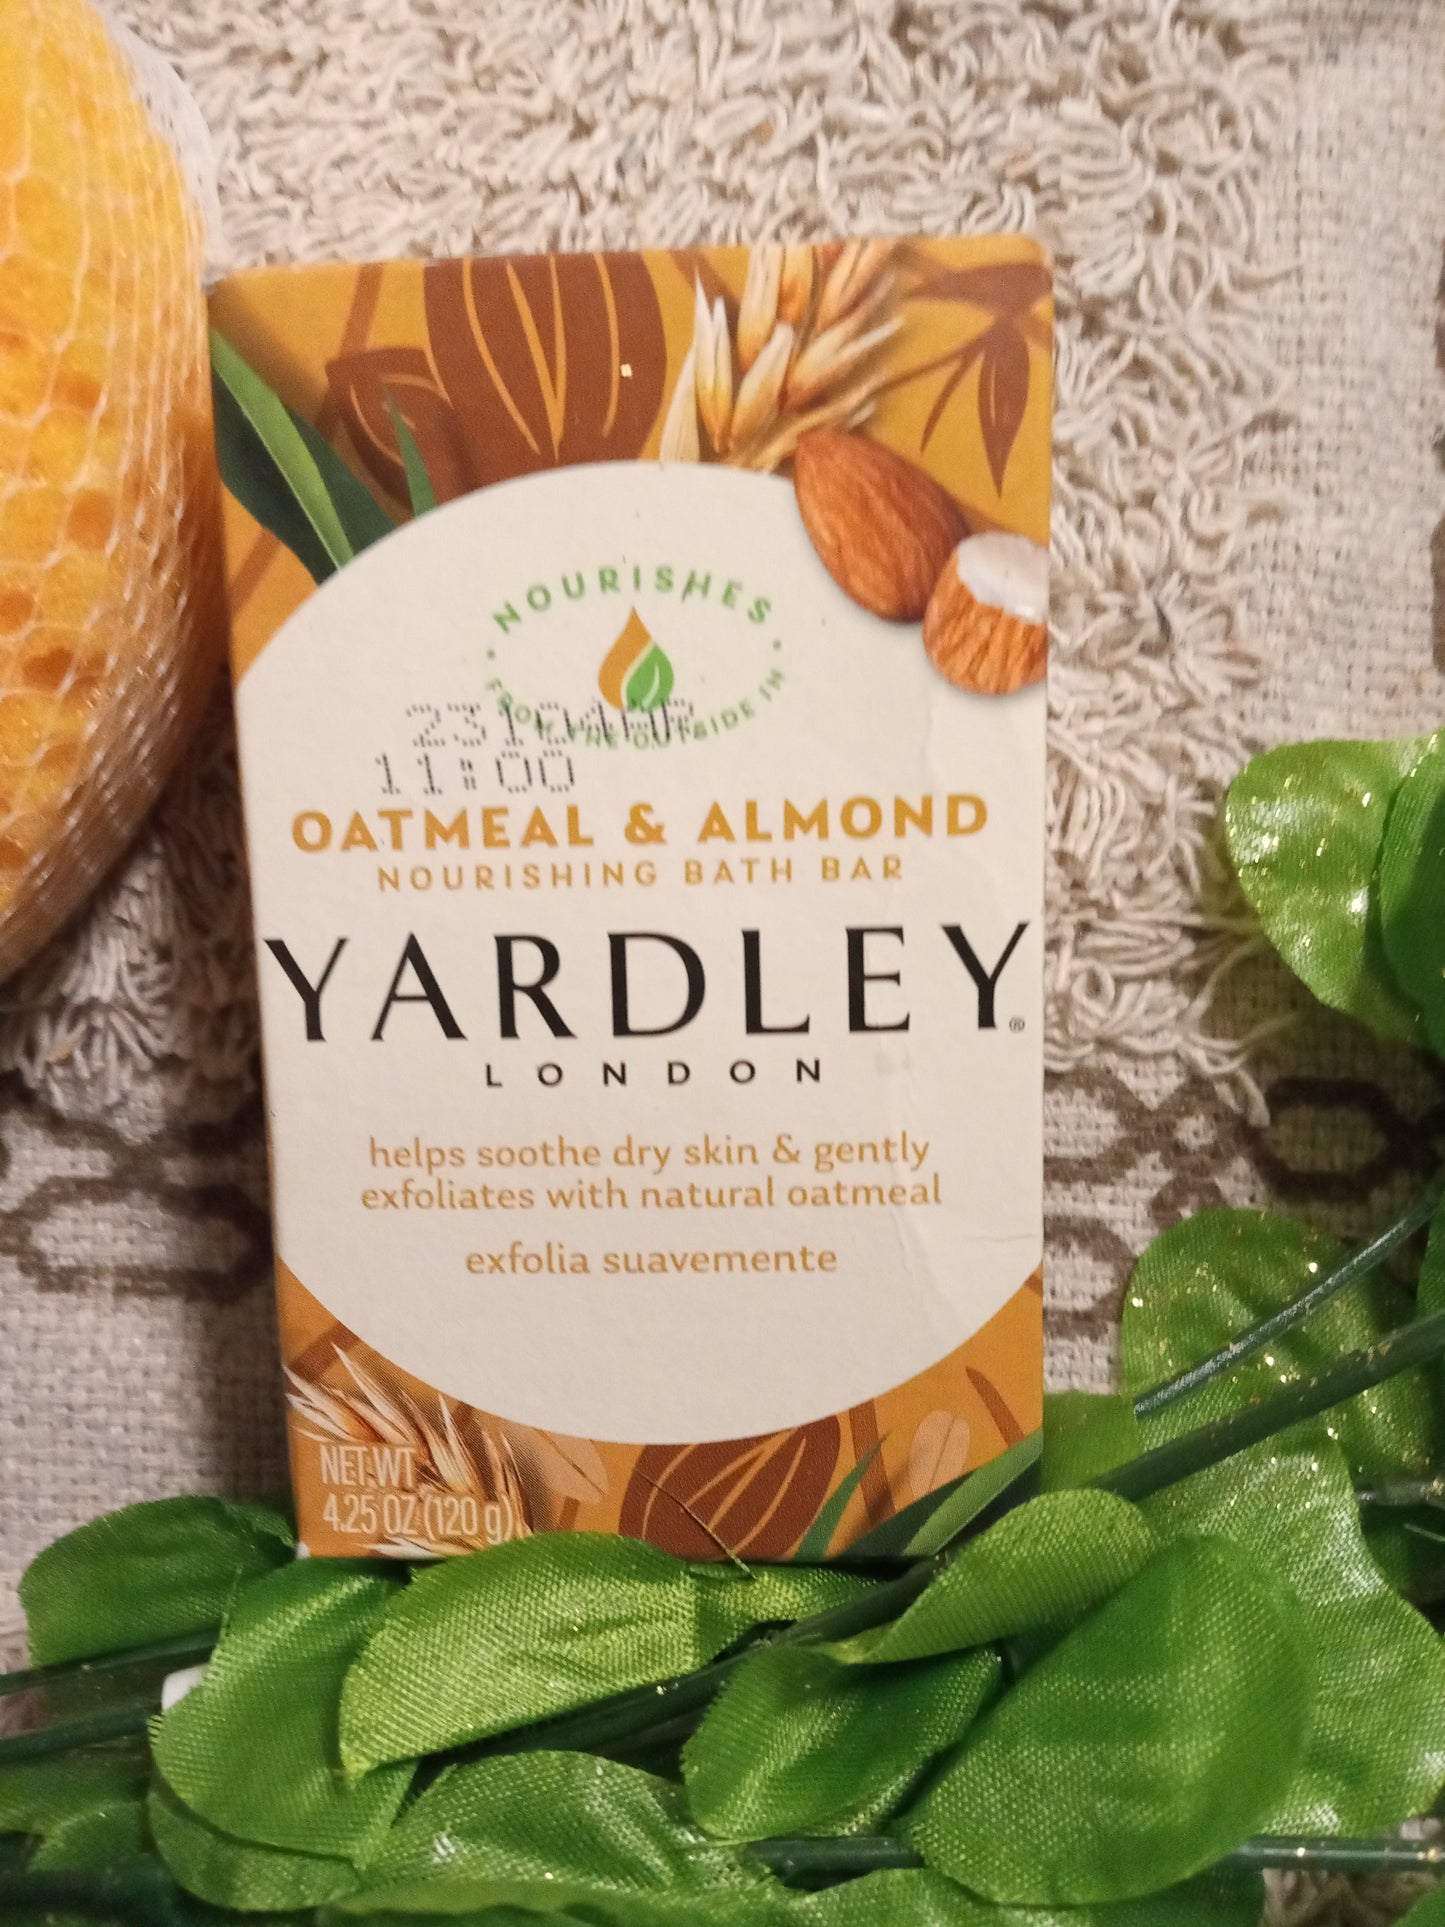 Set of 2 Oatmeal almond nourishing bath bar by Yardley and linden size 4.25 Oz help sue the dry skin gently exfoliate with natural oatmeal